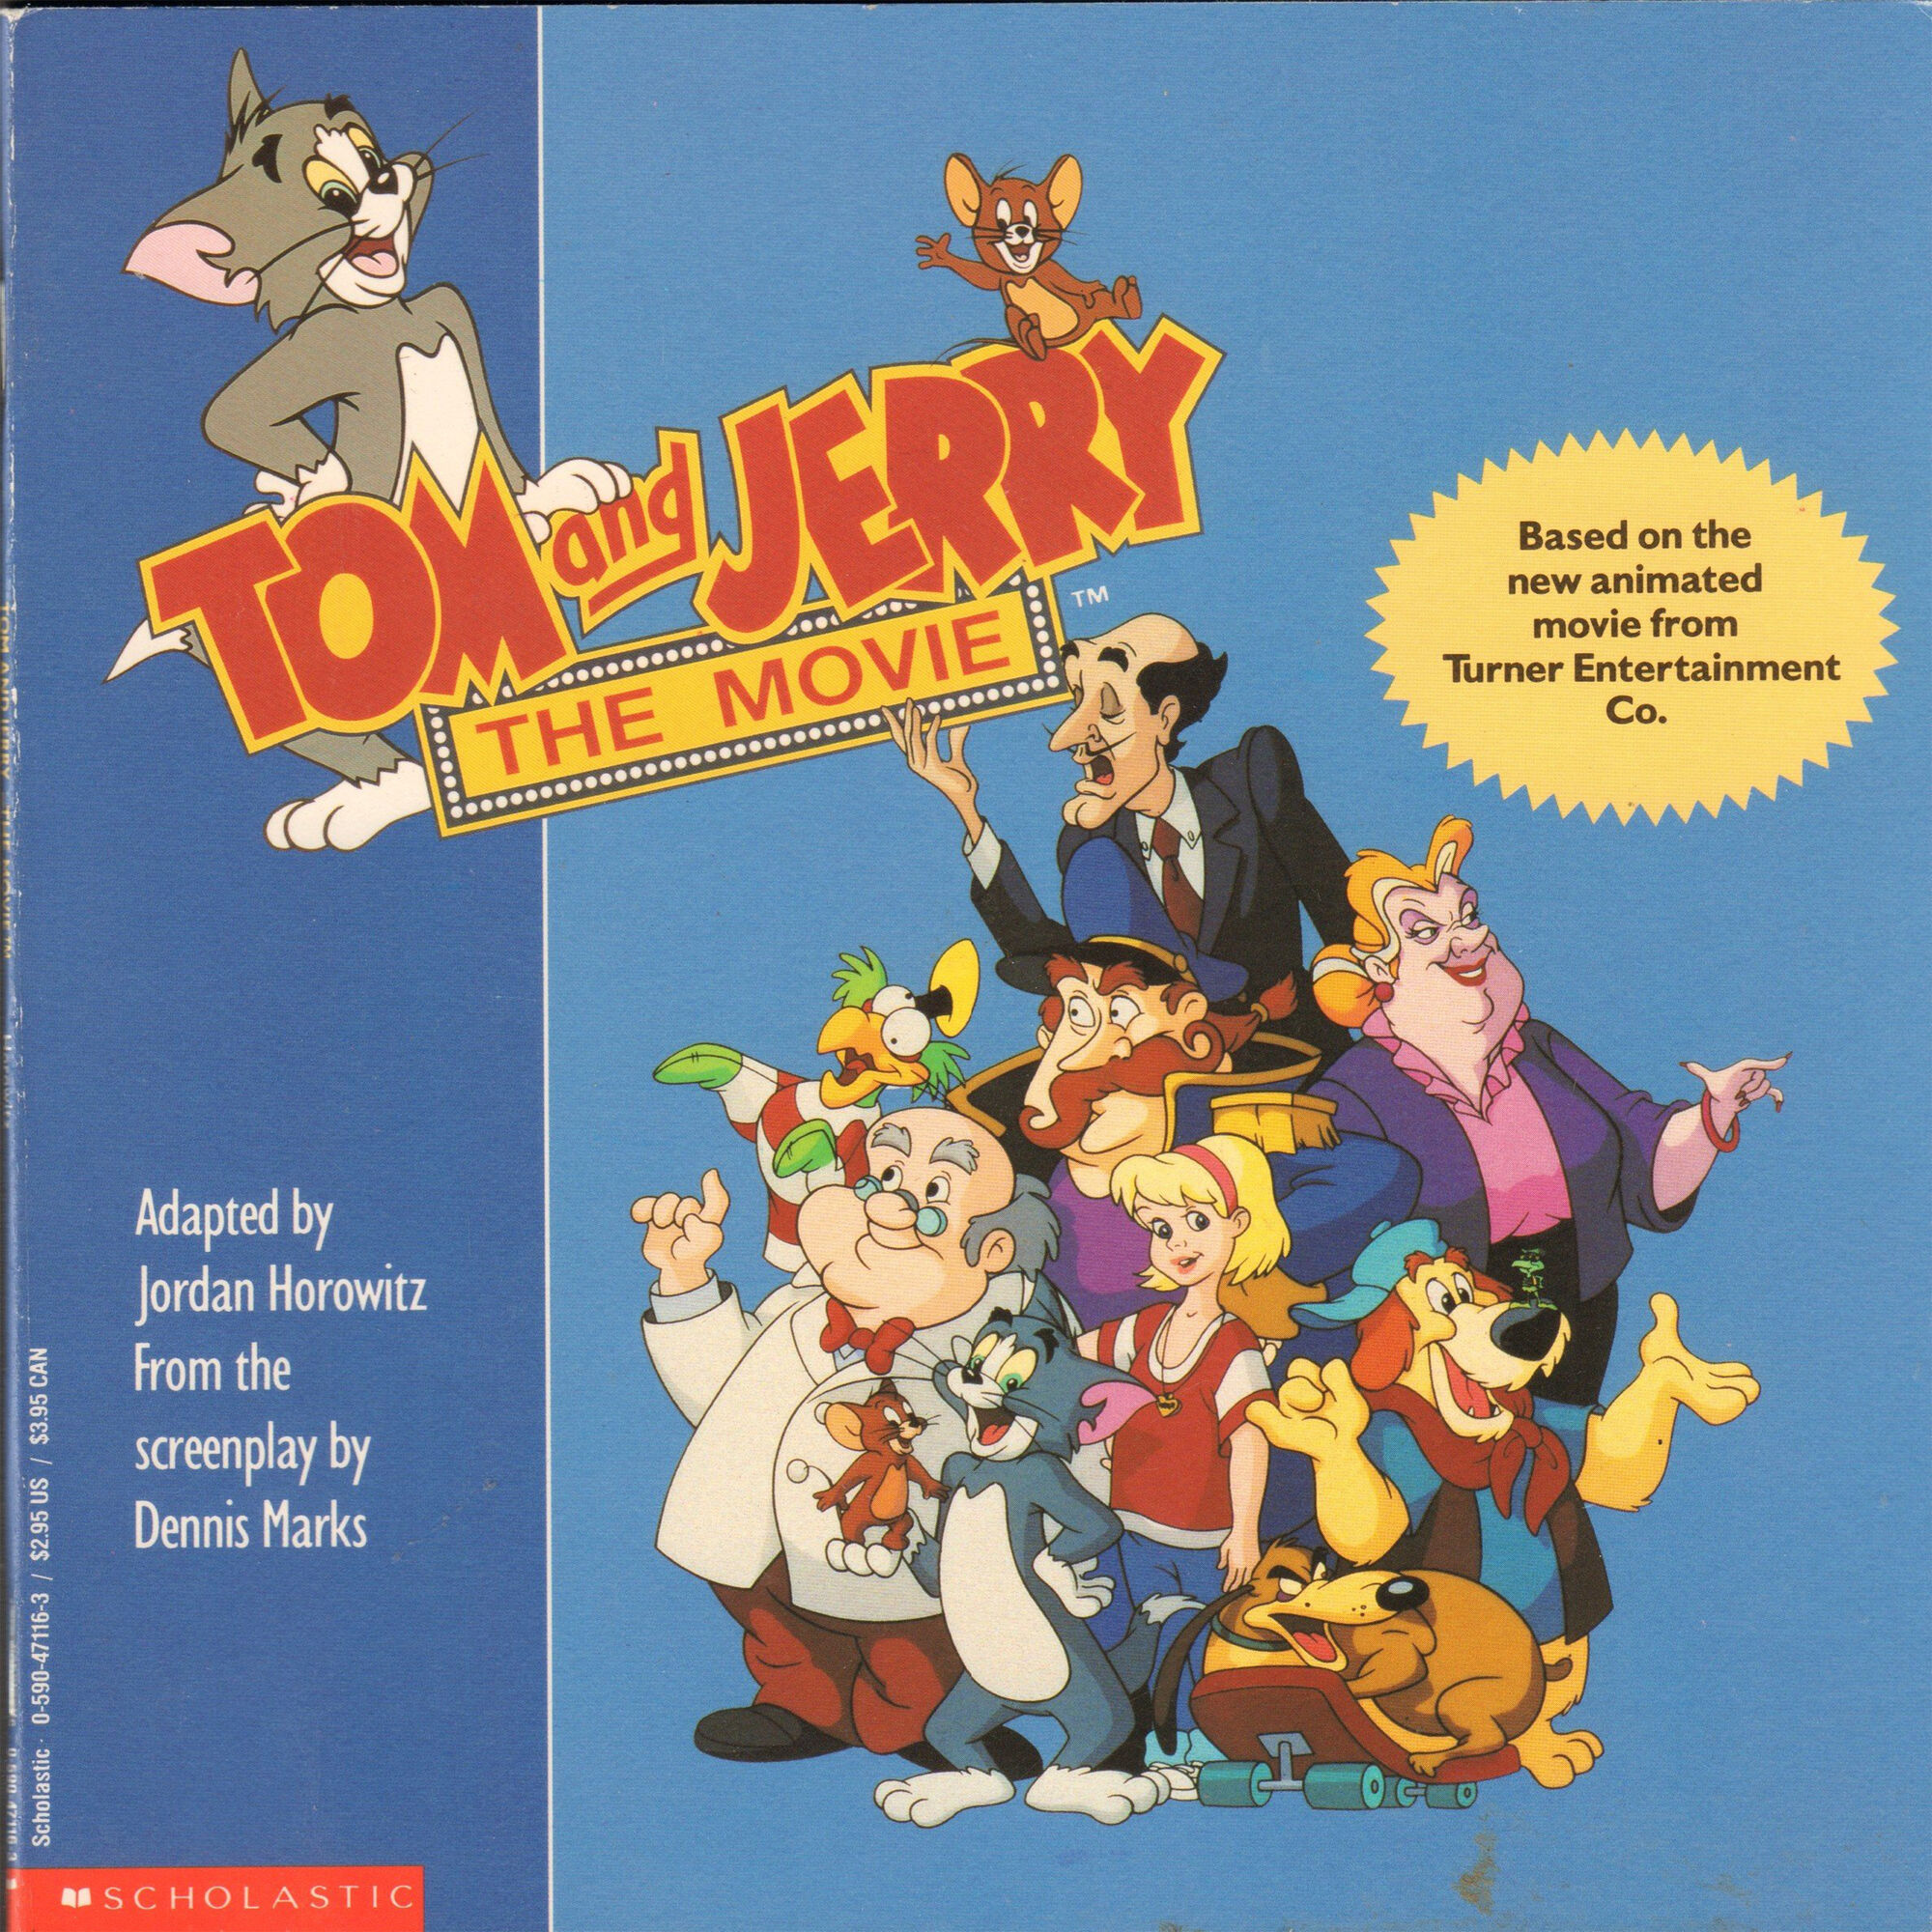 Tom and jerry movie youtube